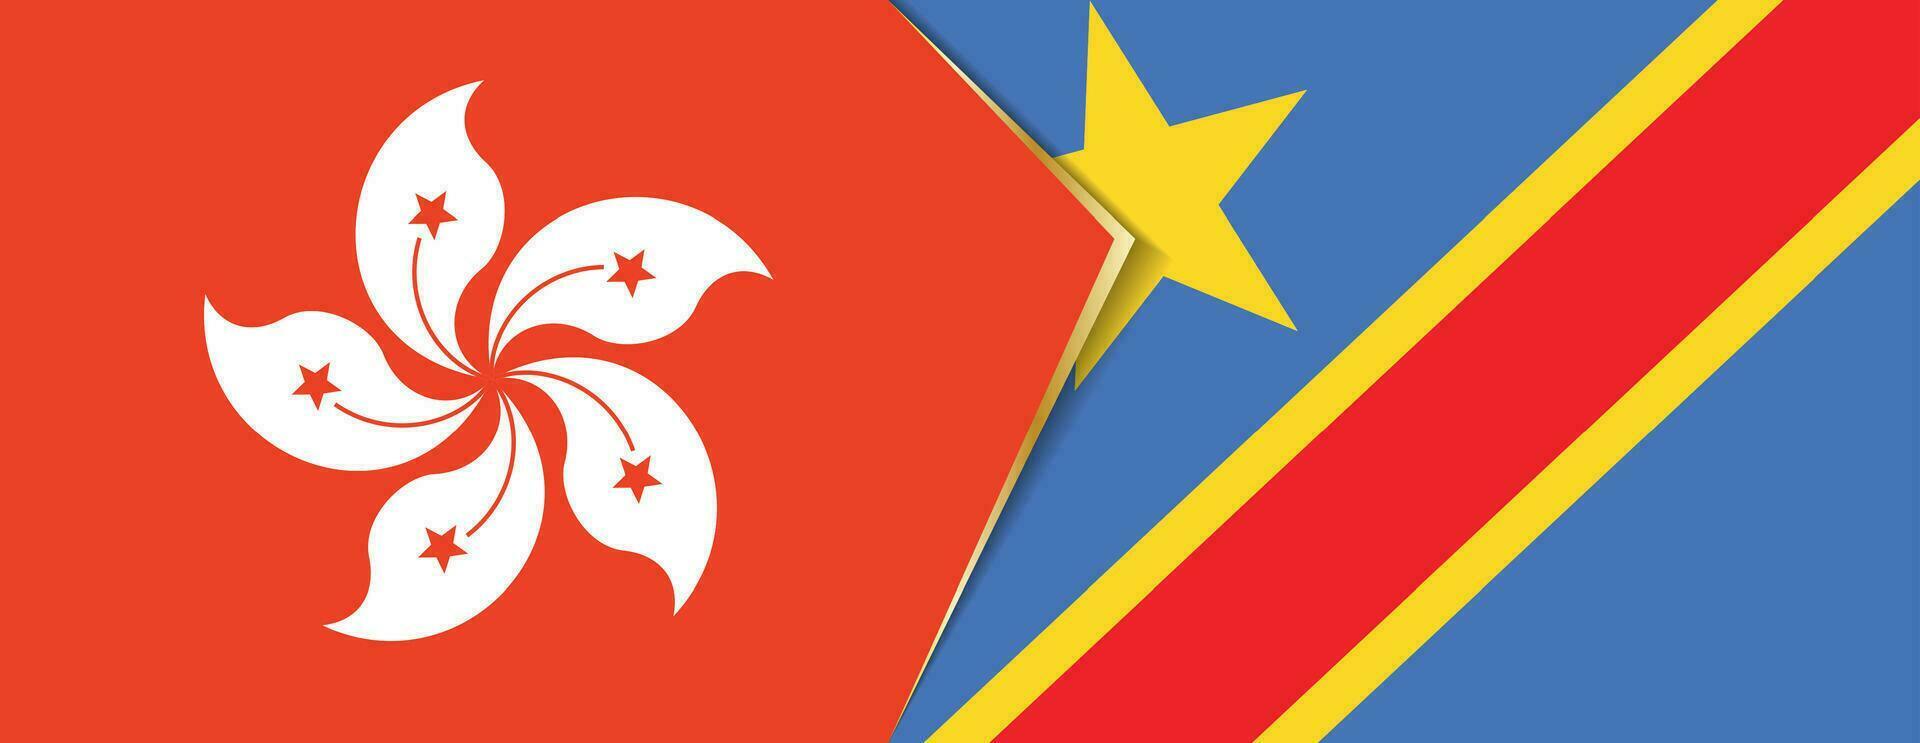 Hong Kong and DR Congo flags, two vector flags.